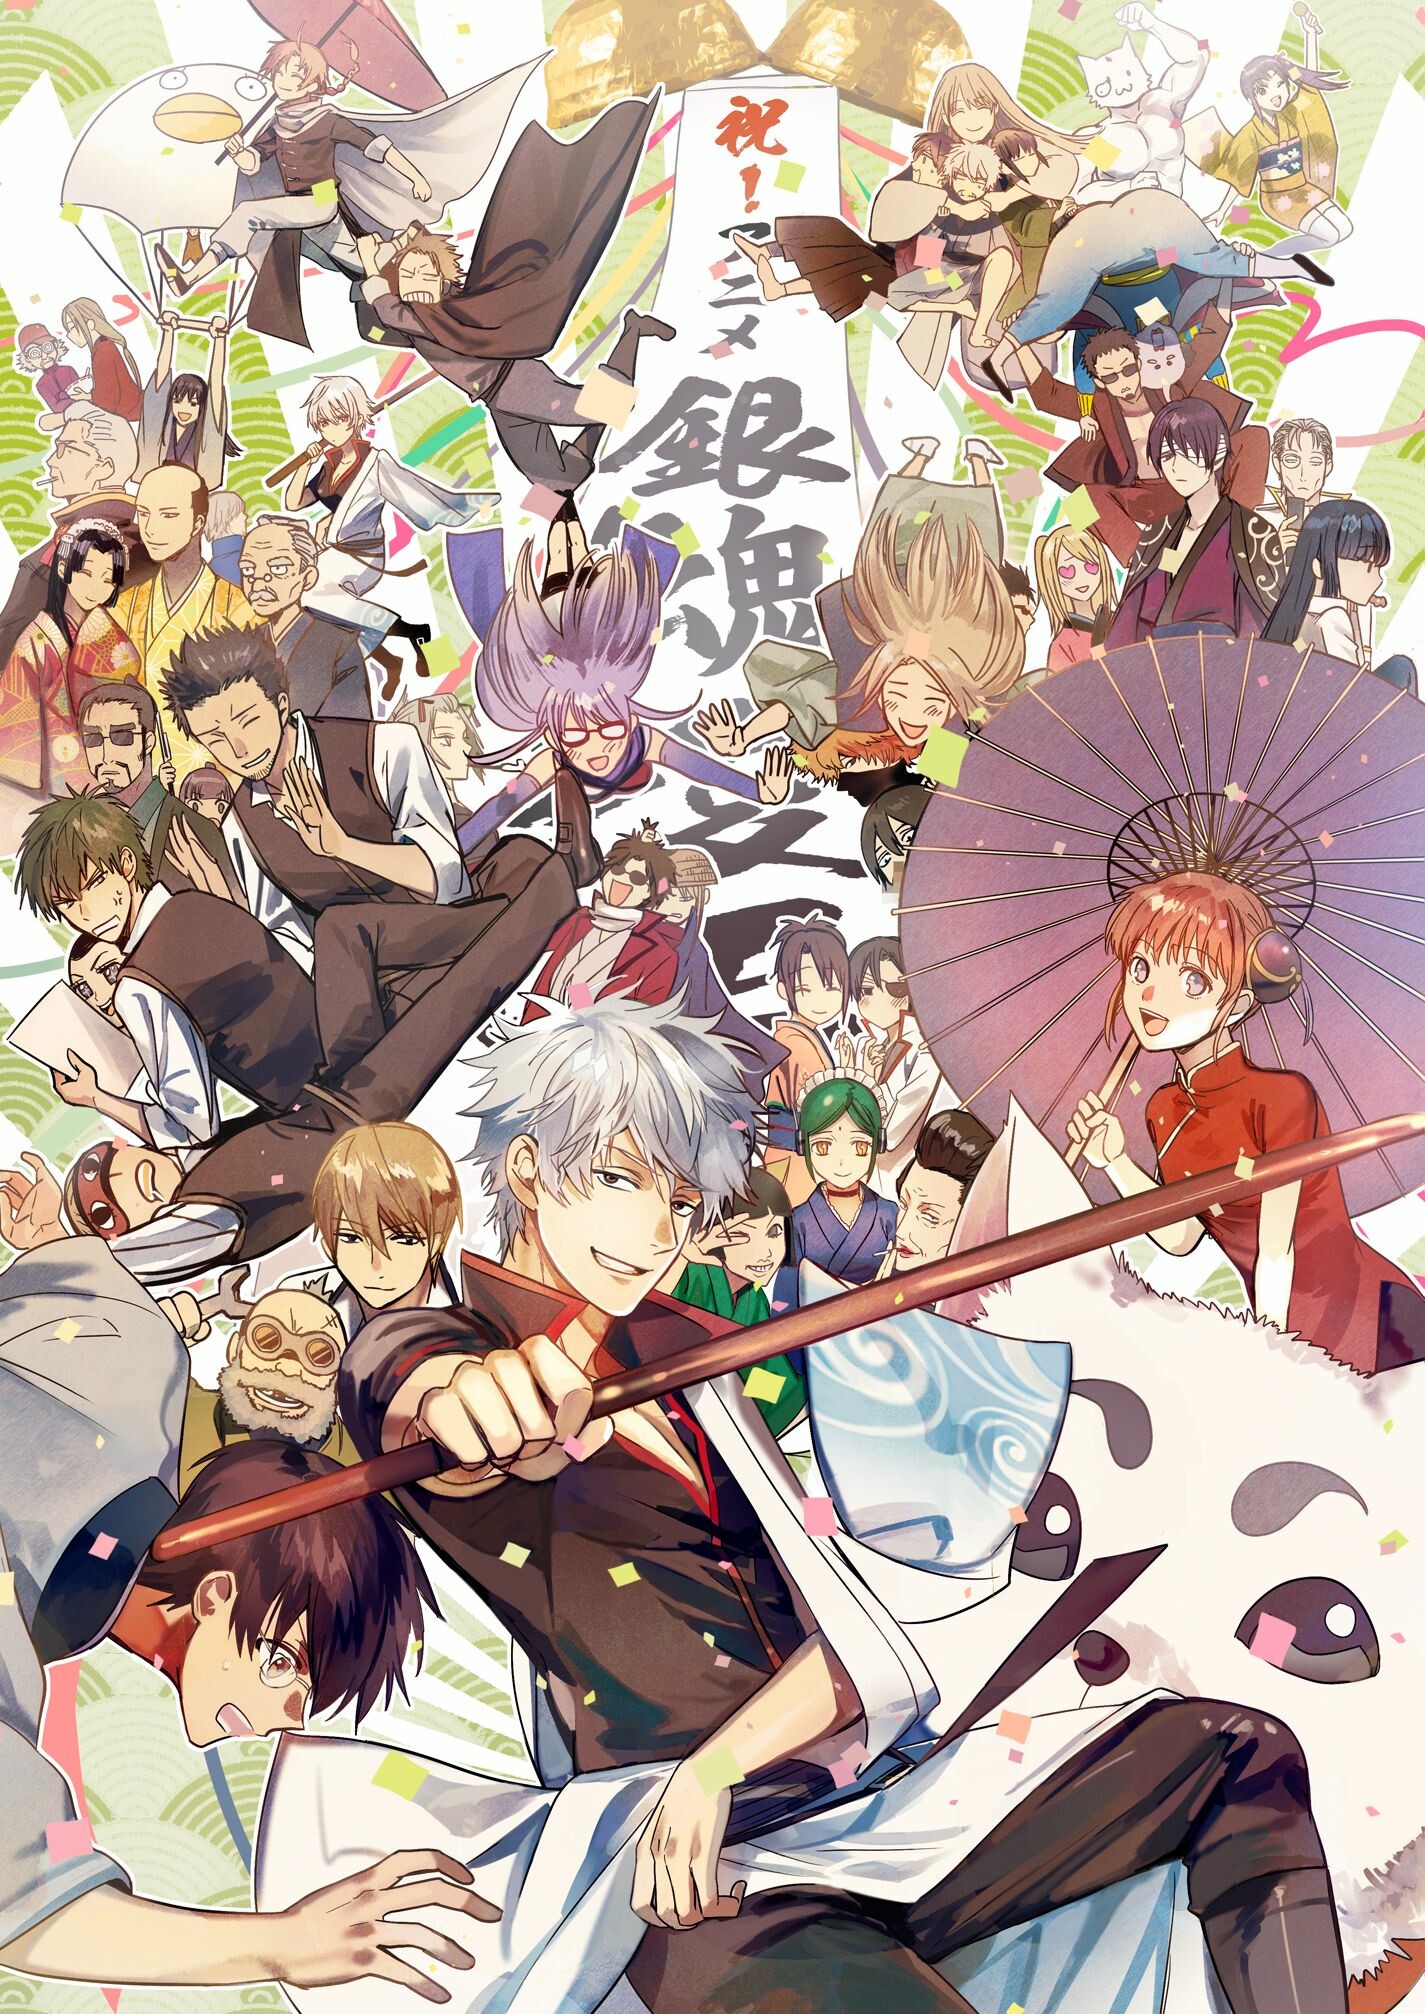 Gintama: The Final: Anime, Sakata, The film was released on January 8, 2021. 1430x2020 HD Background.